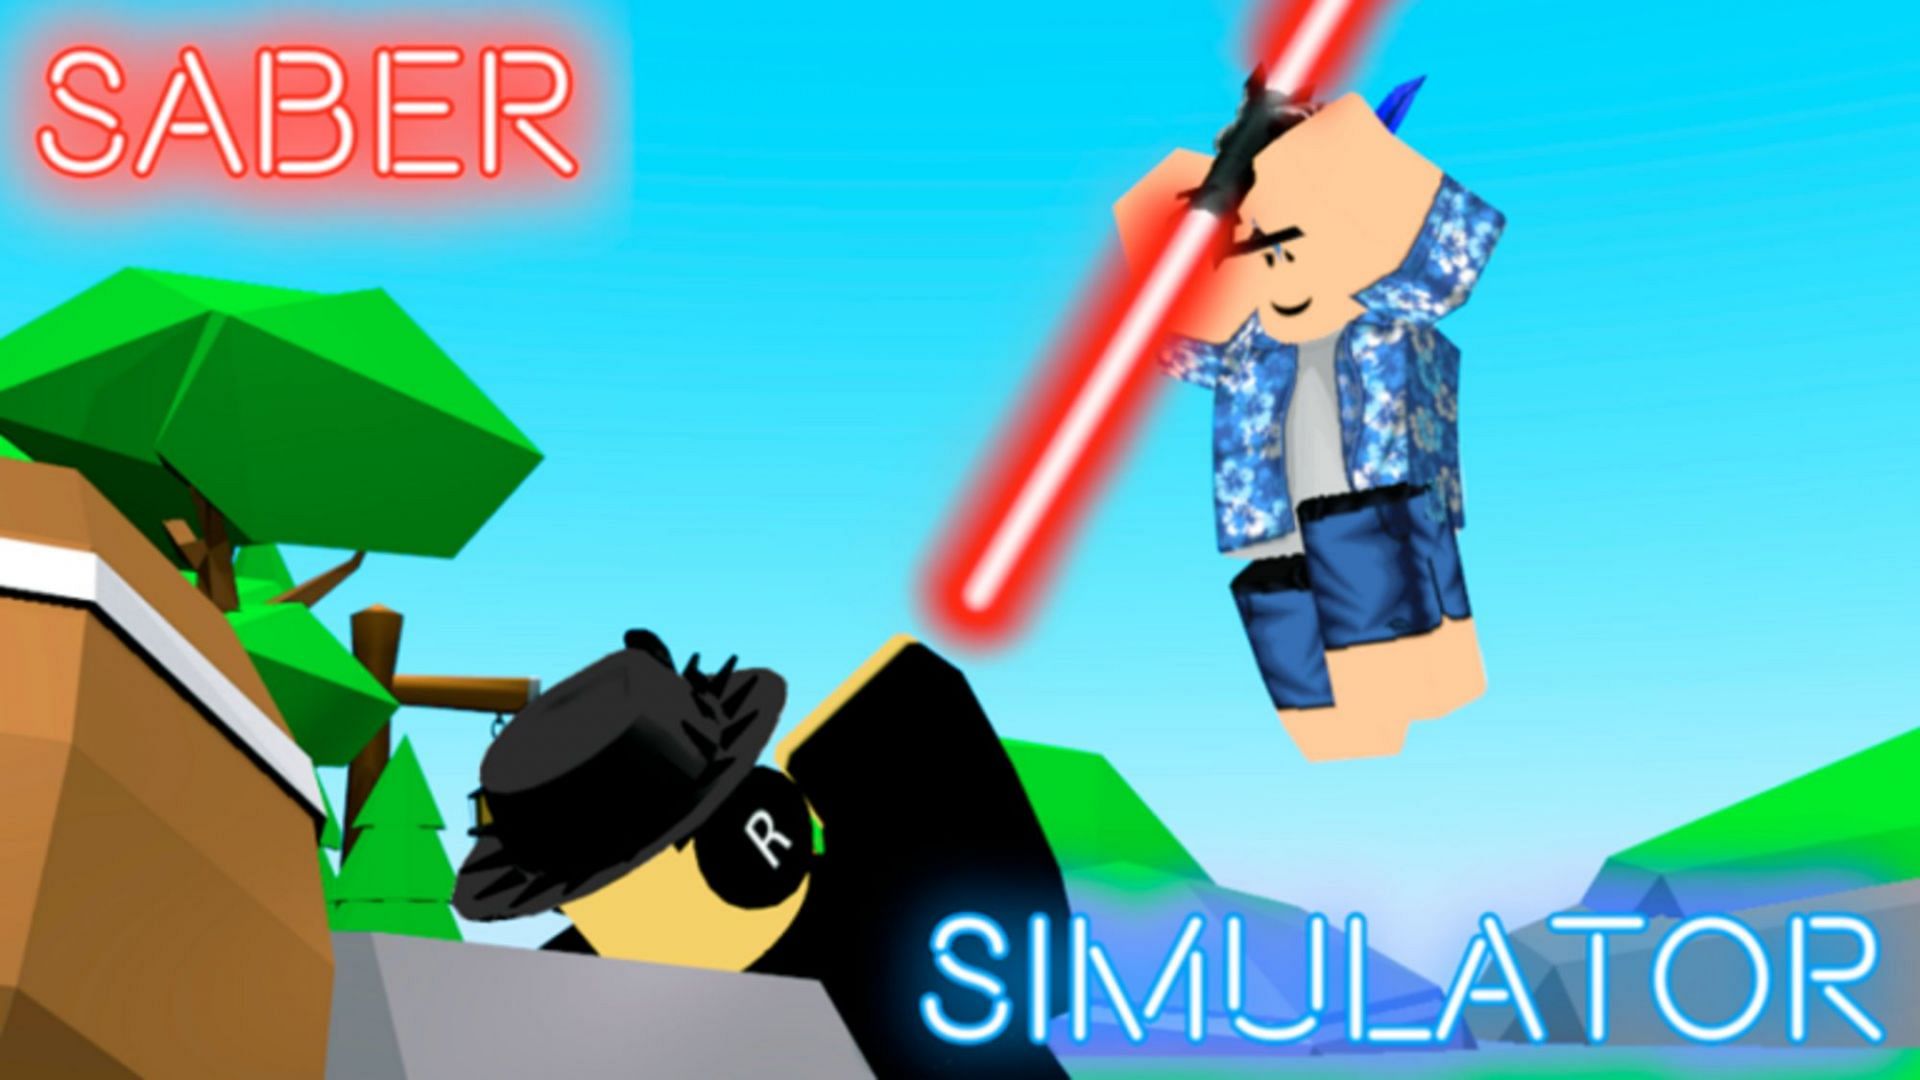 roblox-saber-simulator-codes-september-2022-free-crowns-charms-and-more